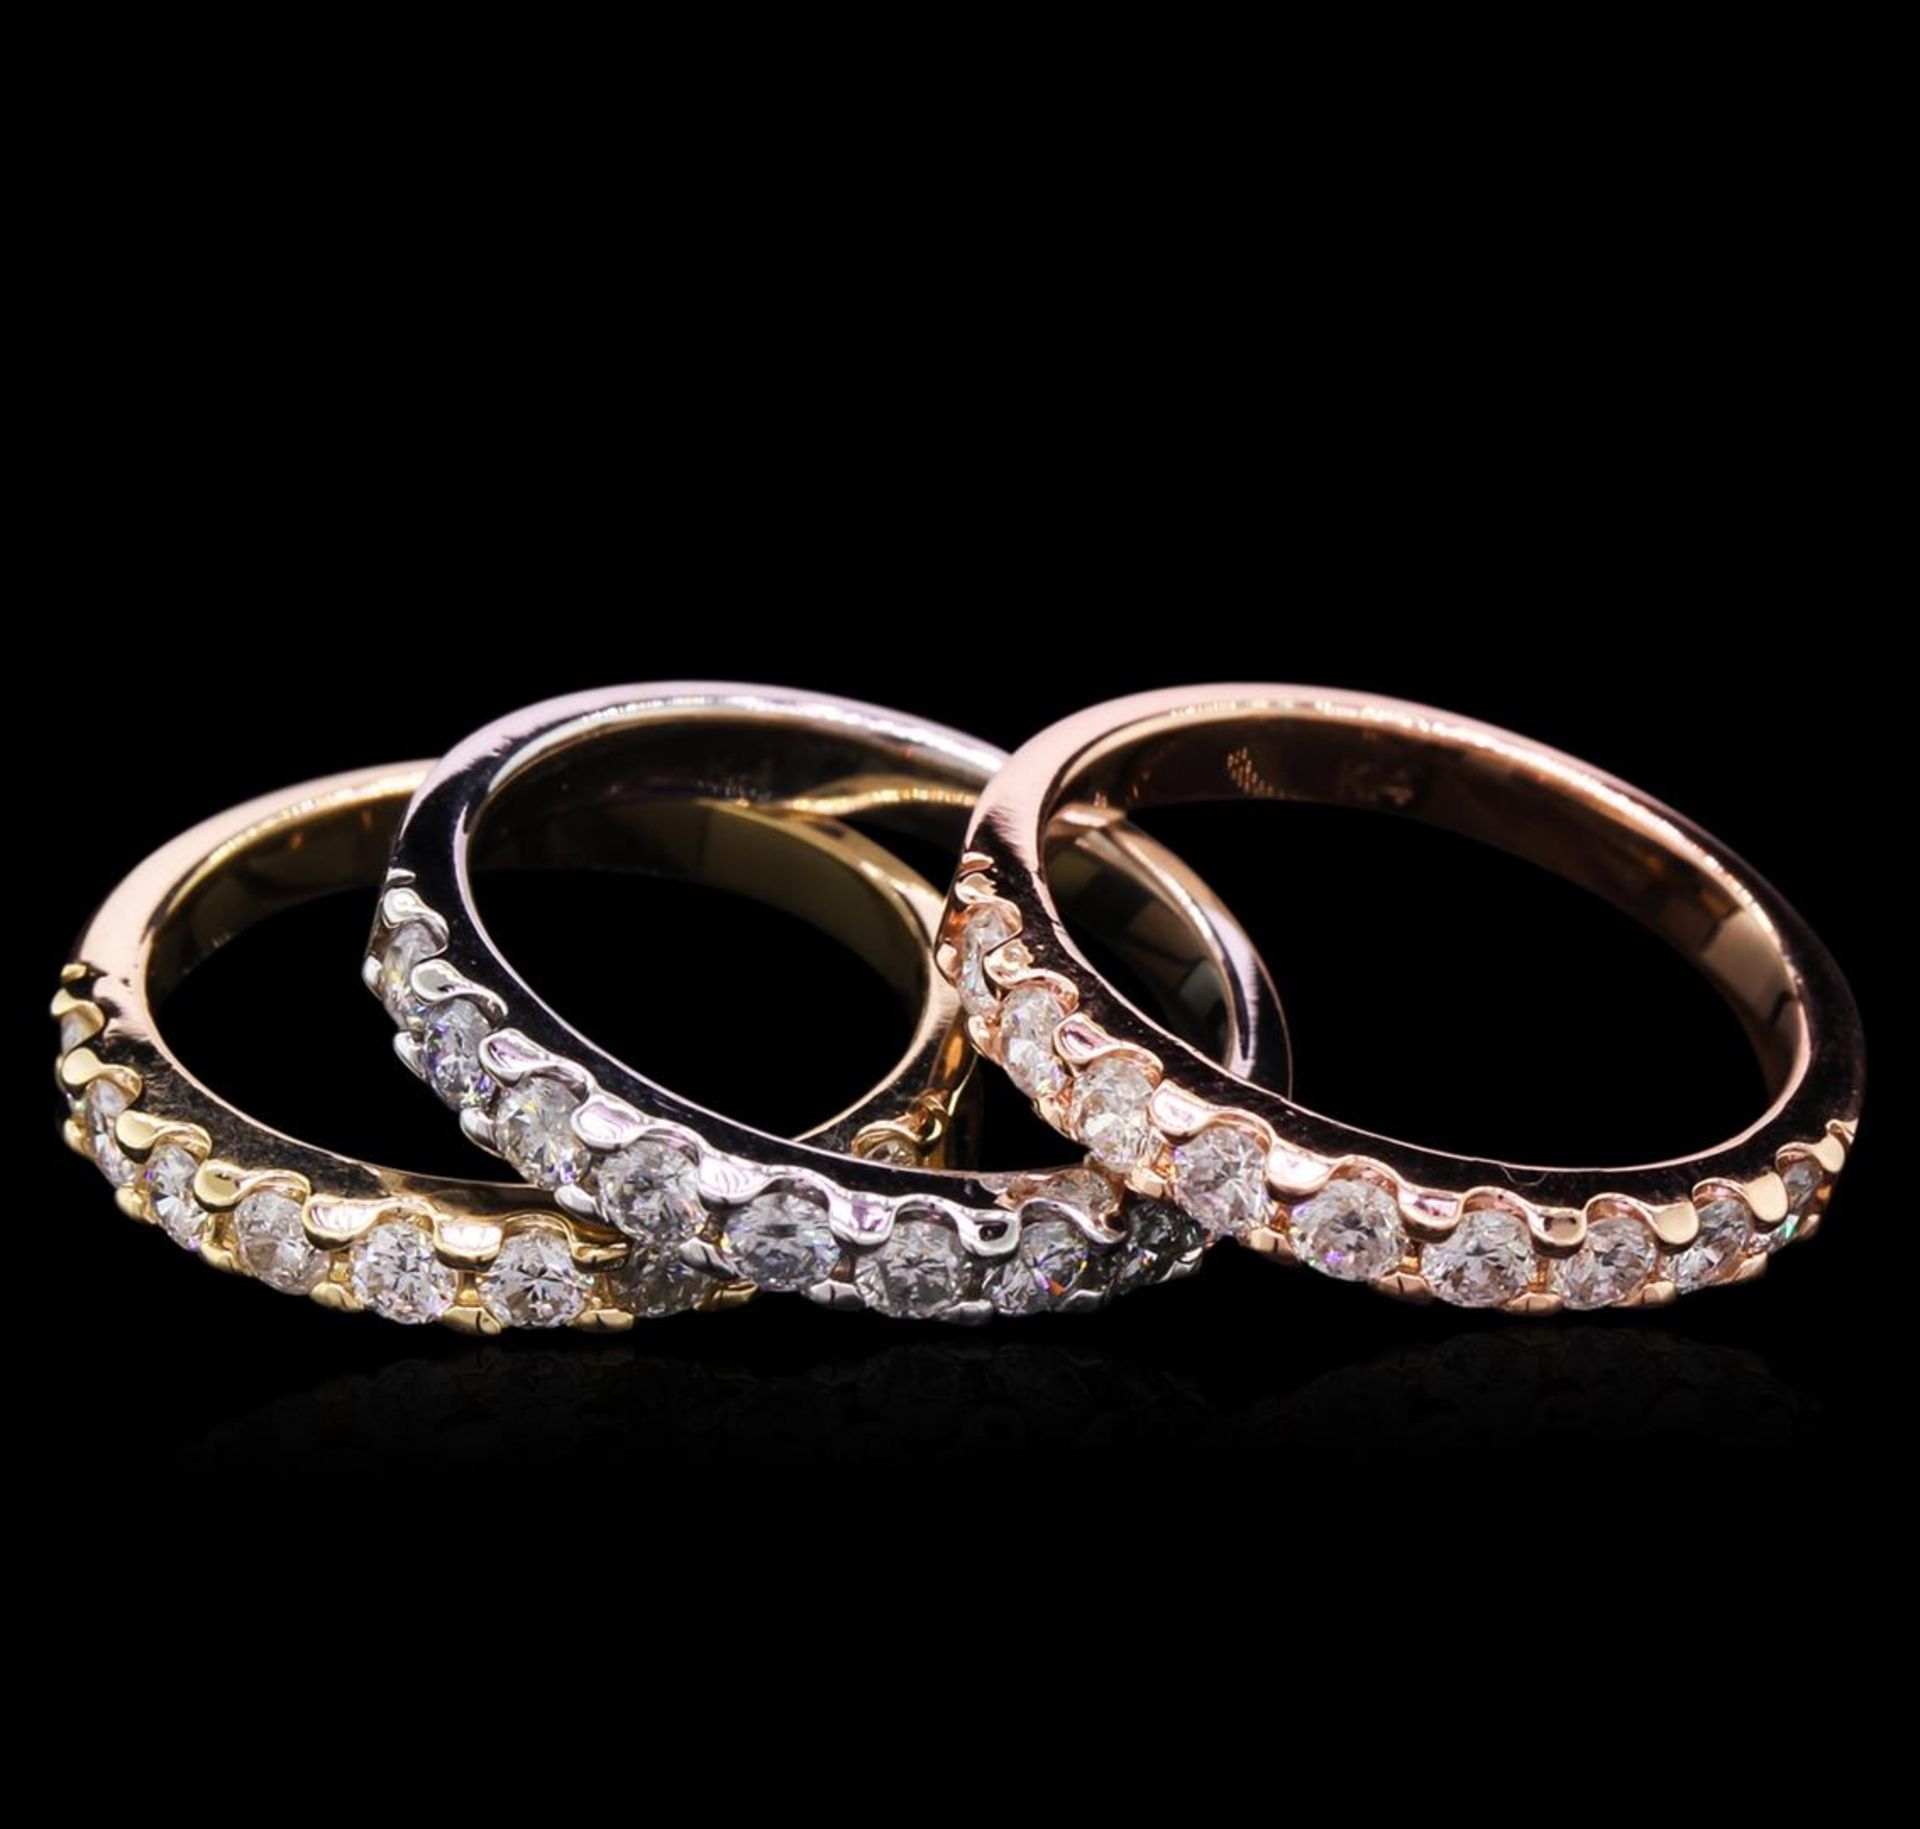 1.65 ctw Diamond Stackable Rings - 14KT Tri-Color Gold - Image 2 of 3